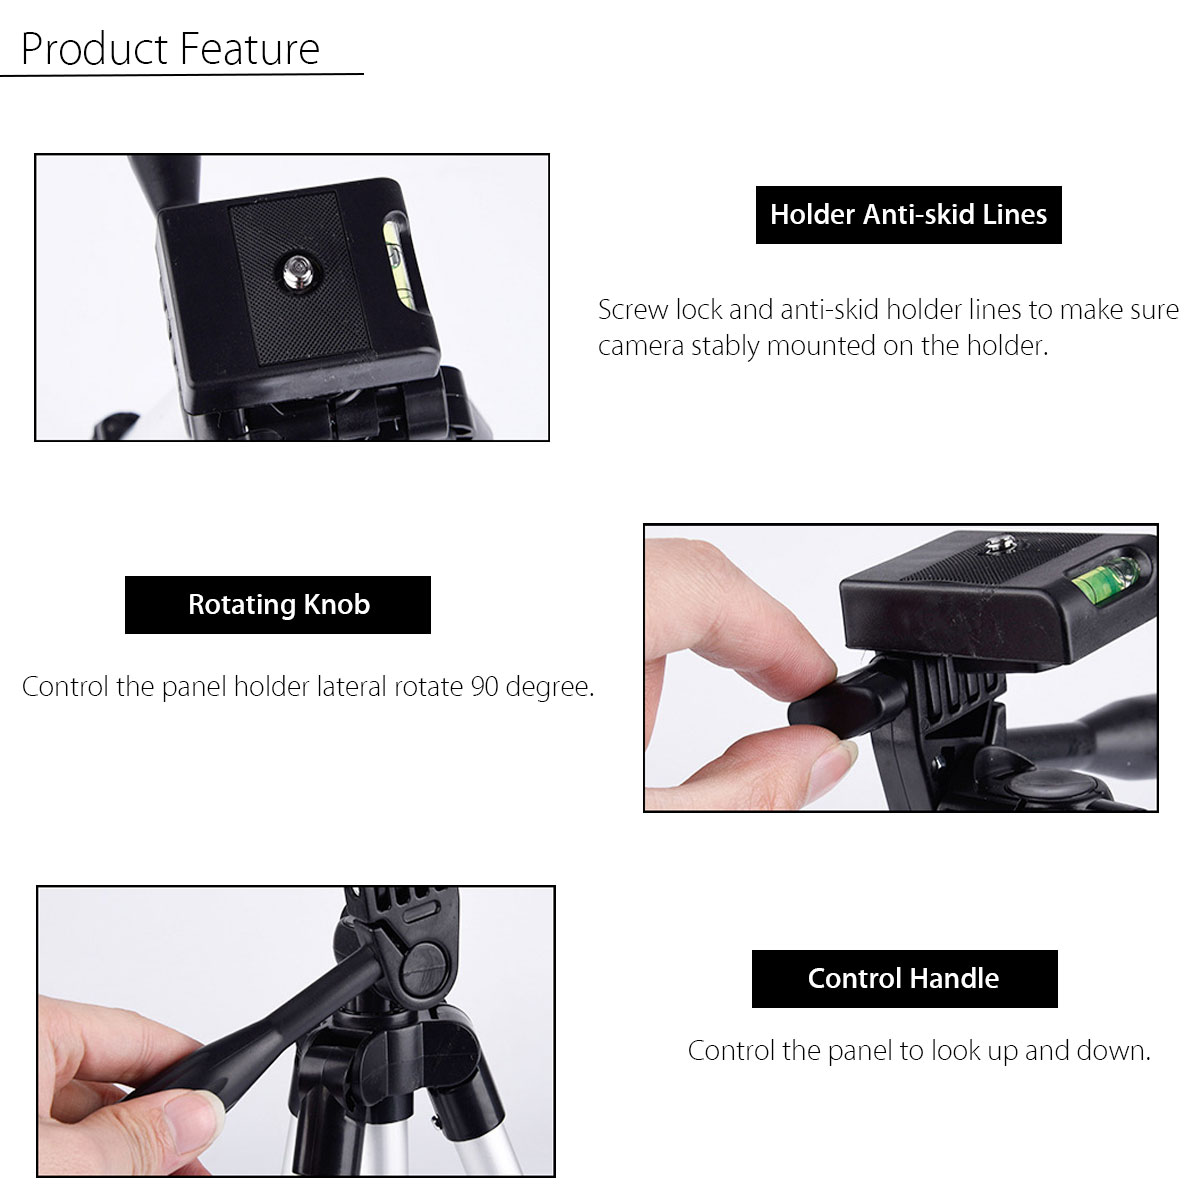 Bakeey Professional Camera Adjustable Tripod Stand Holder Live Selfie Stick for iPhone 8 Plus X S8 S9